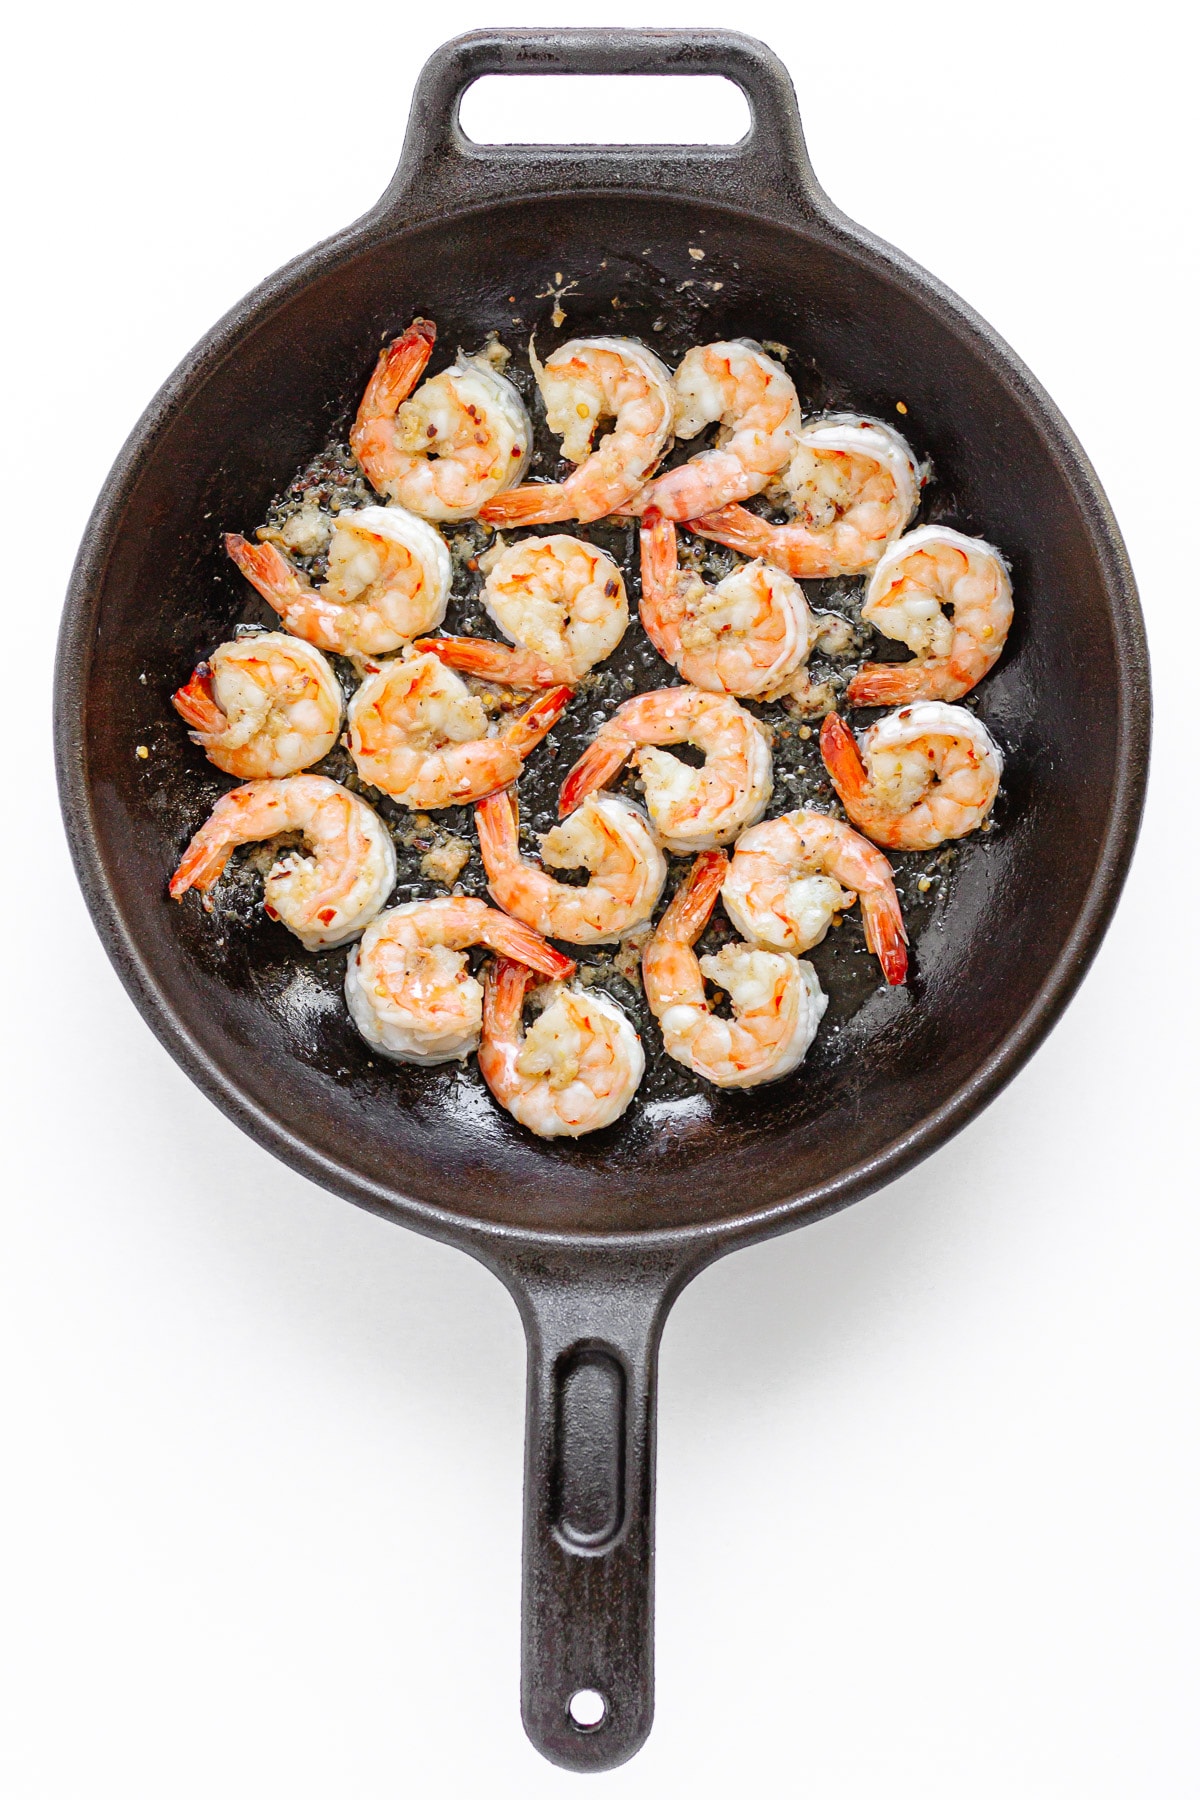 Shrimp being sauteed in a cast iron skillet.